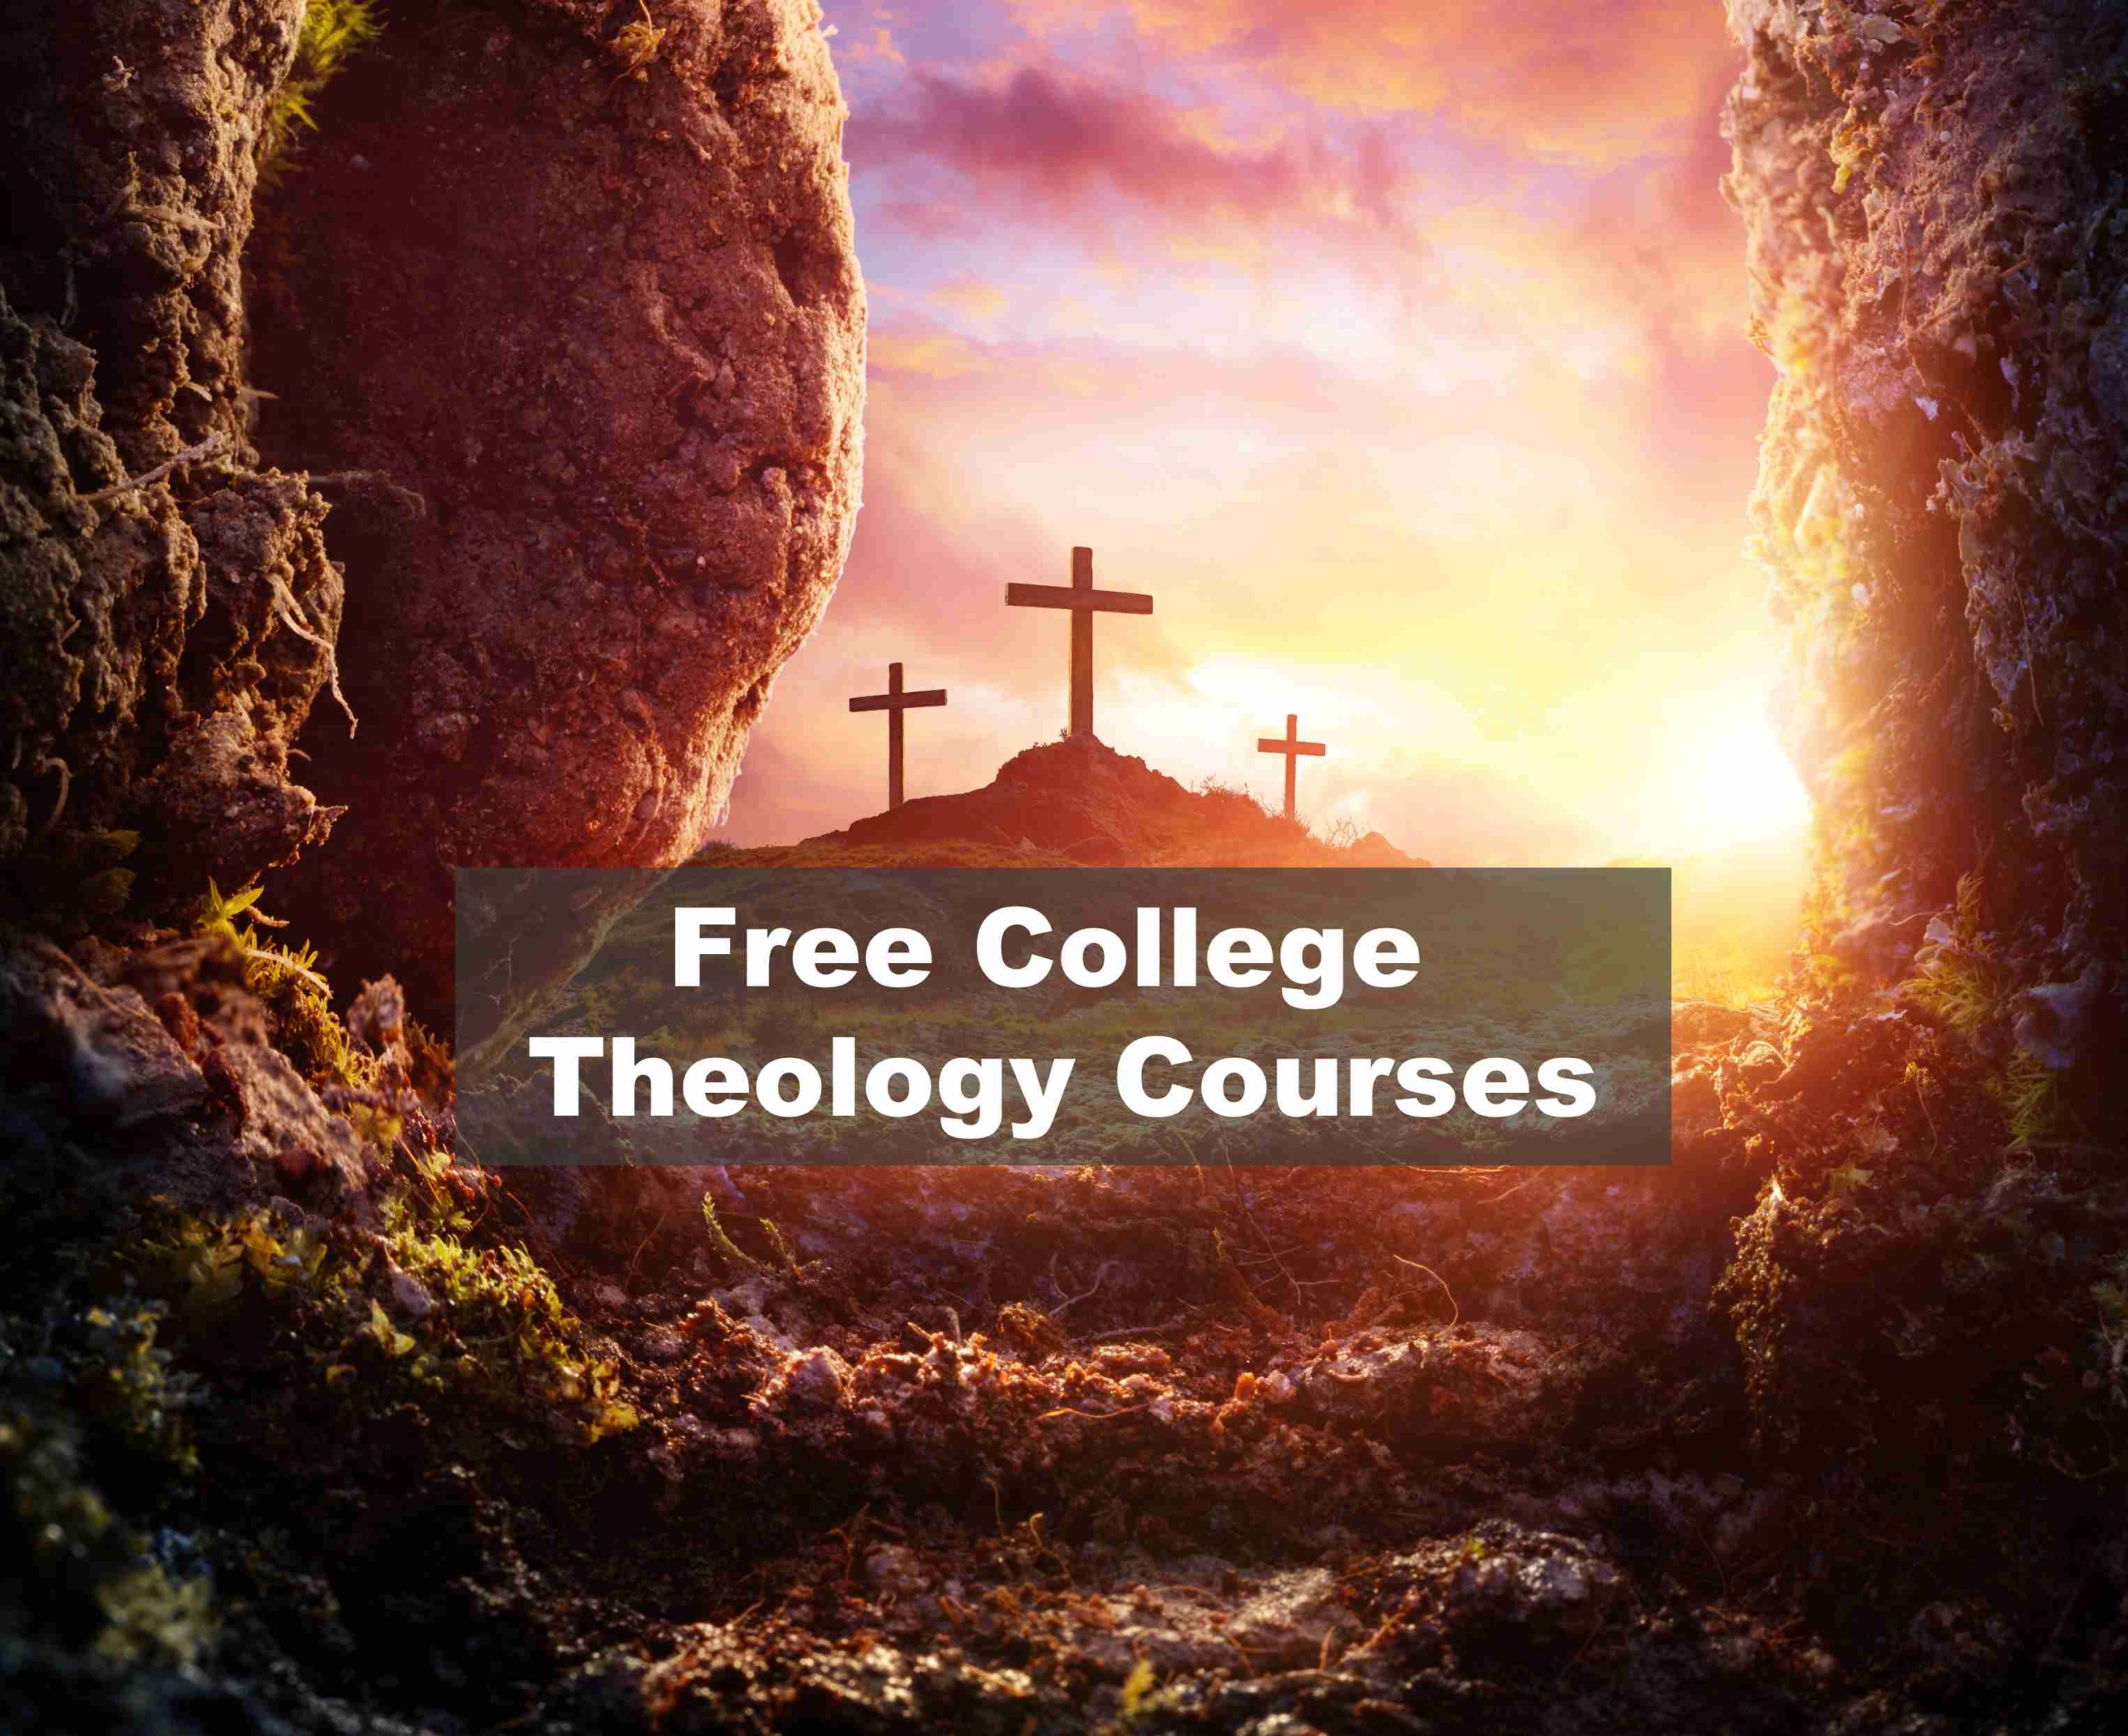 Free College Theology Courses - Christian Leaders College